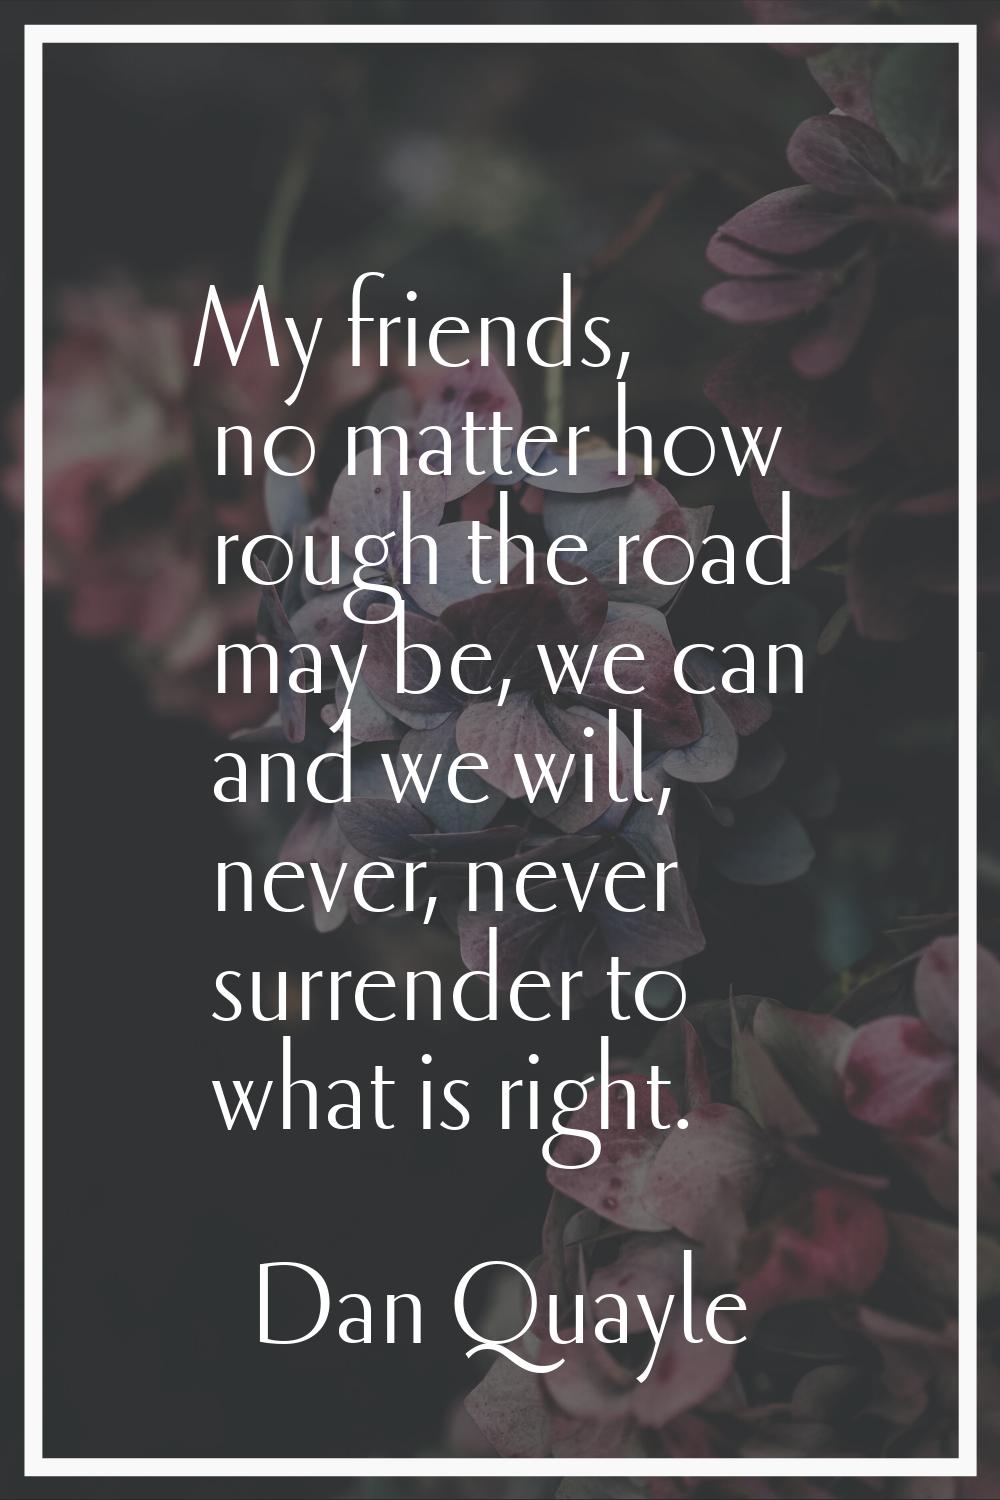 My friends, no matter how rough the road may be, we can and we will, never, never surrender to what